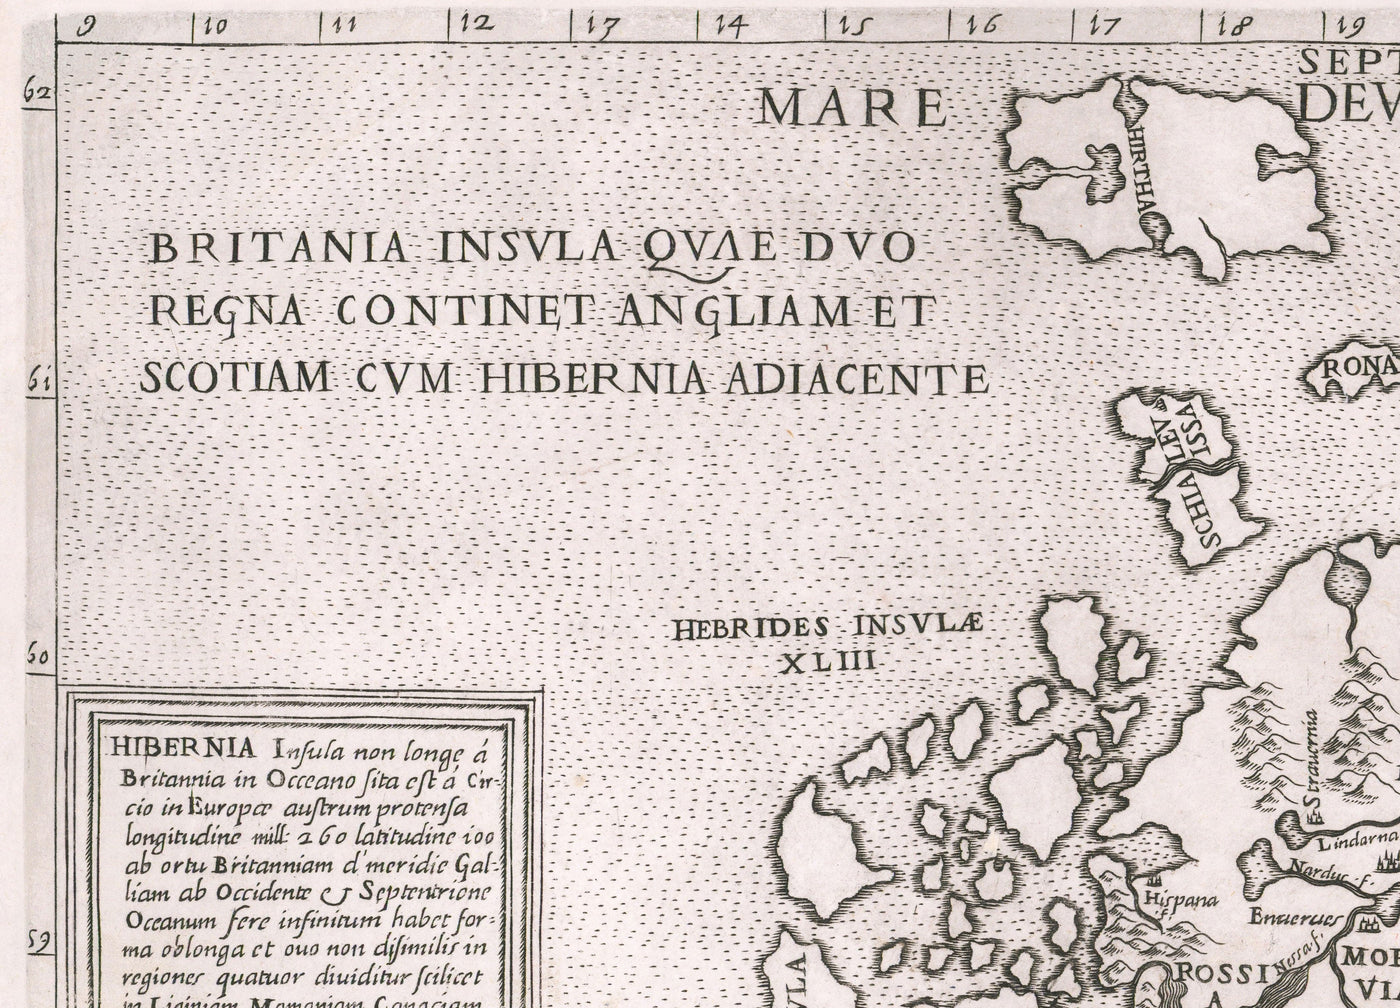 Very Old Map of the British Isles, 1562 by George Lily - First True Map of Great Britain and Ireland - Bertelli & Lafreri Version of George Lily's Map